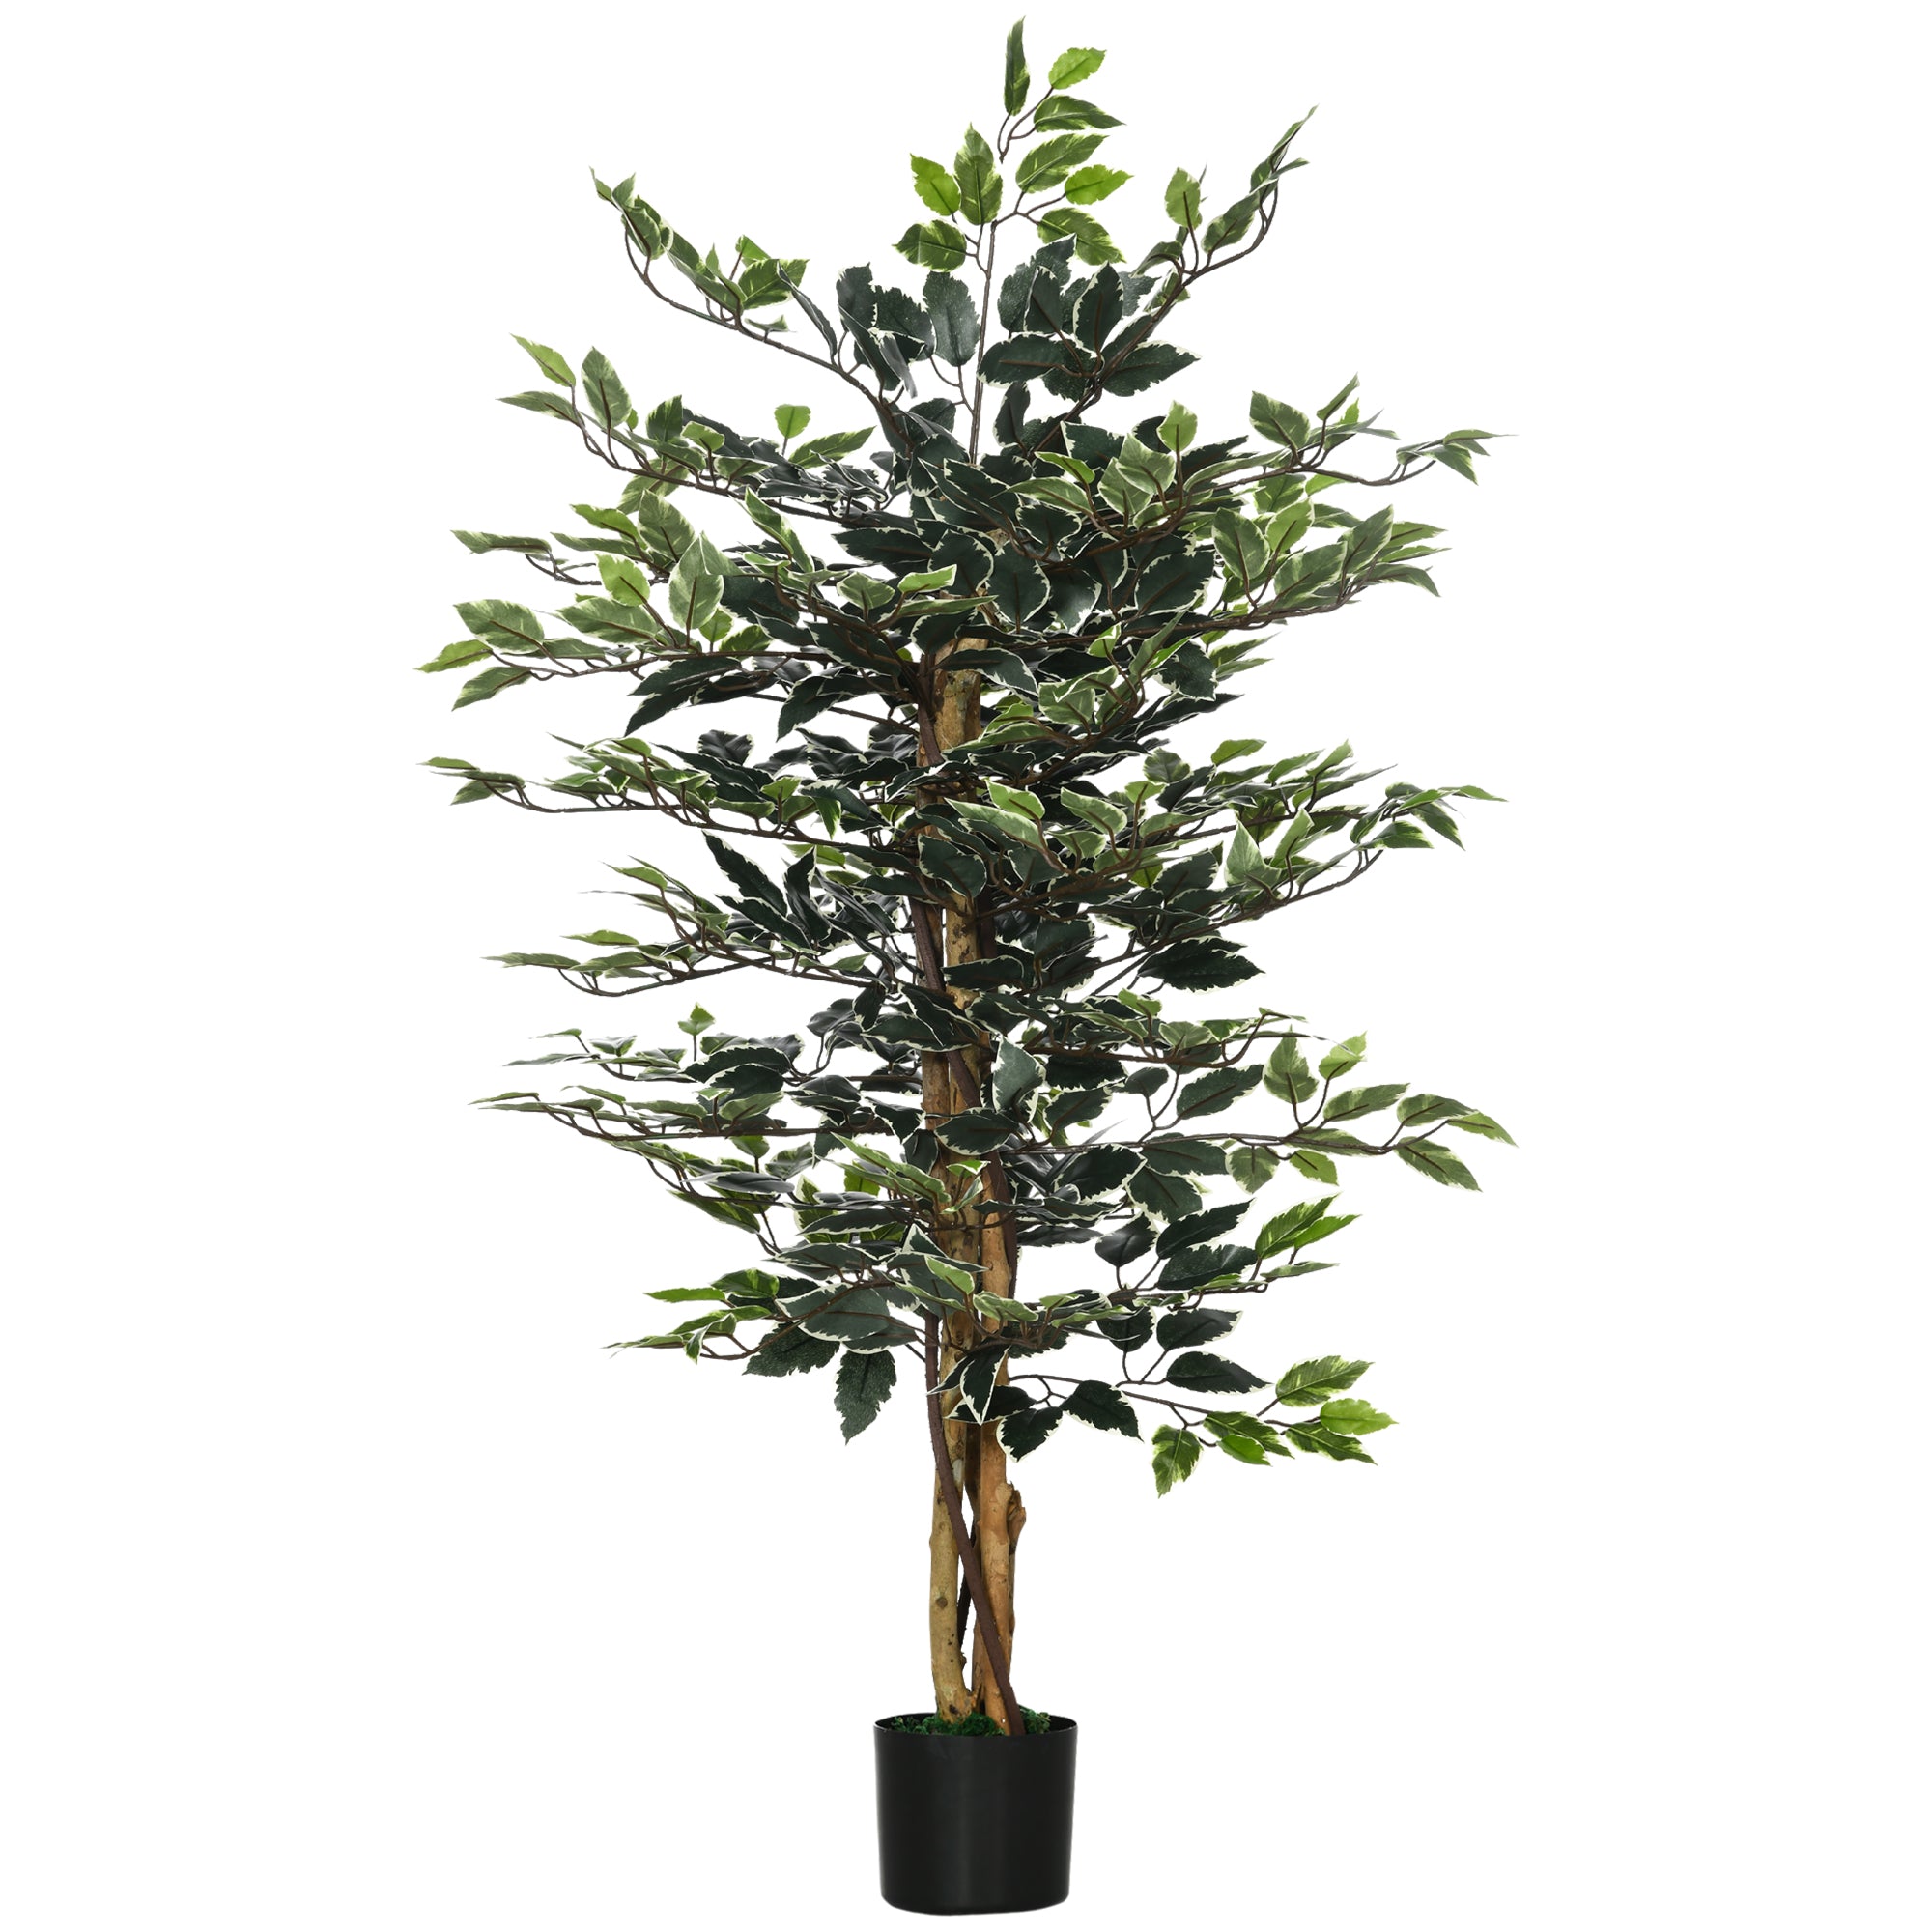 HOMCOM Artificial Ficus Tree in Pot - 130cm Tall Fake Plant with Lifelike Leaves and Natural Trunks - for Indoor Outdoor - Green  | TJ Hughes Light Gr